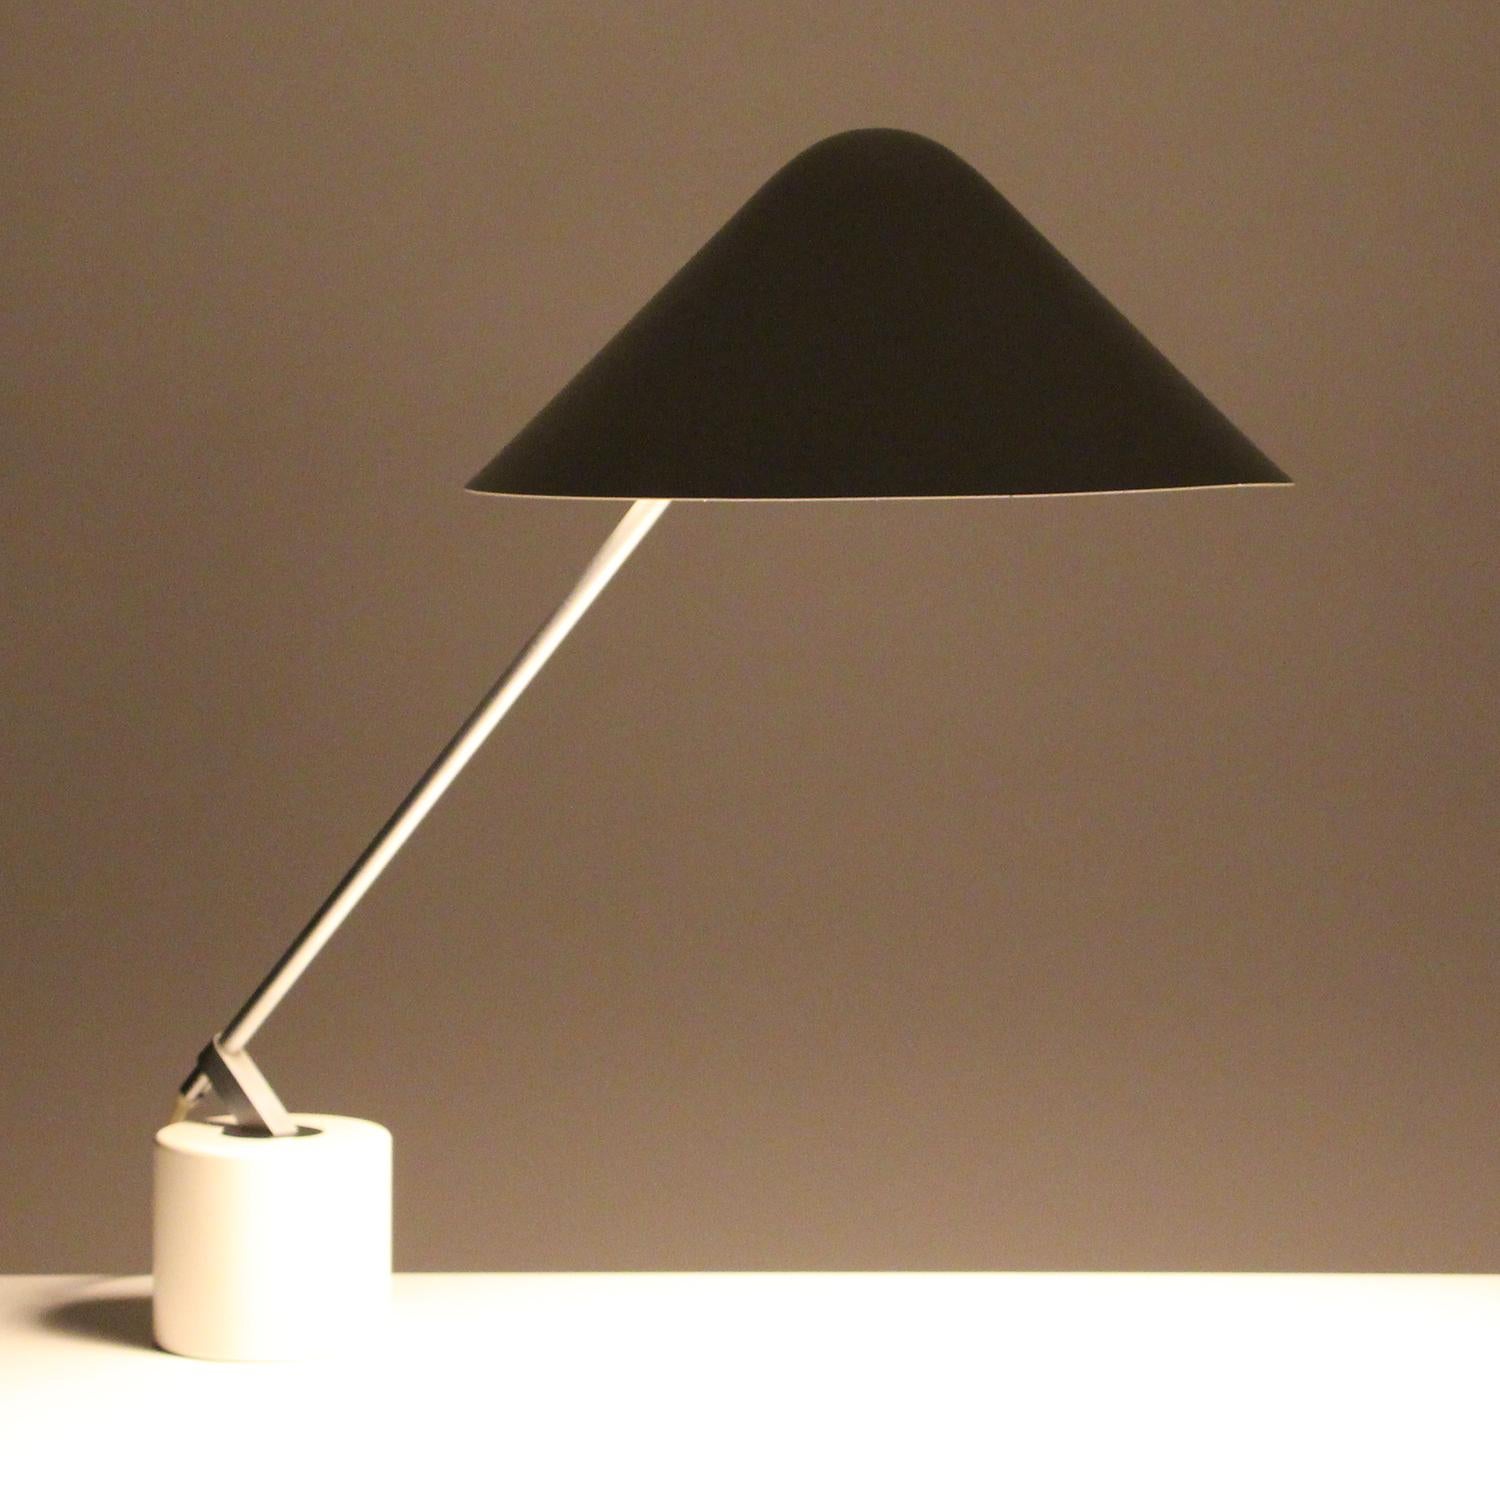 Swing VIP large white desk lamp by Jorgen Gammelgaard for Design Forum/Pandul in 1983 - Minimalist and stylish white table light with movable arm, in very good vintage condition.

A timeless desk light comprised of a cylindrical massive steel base